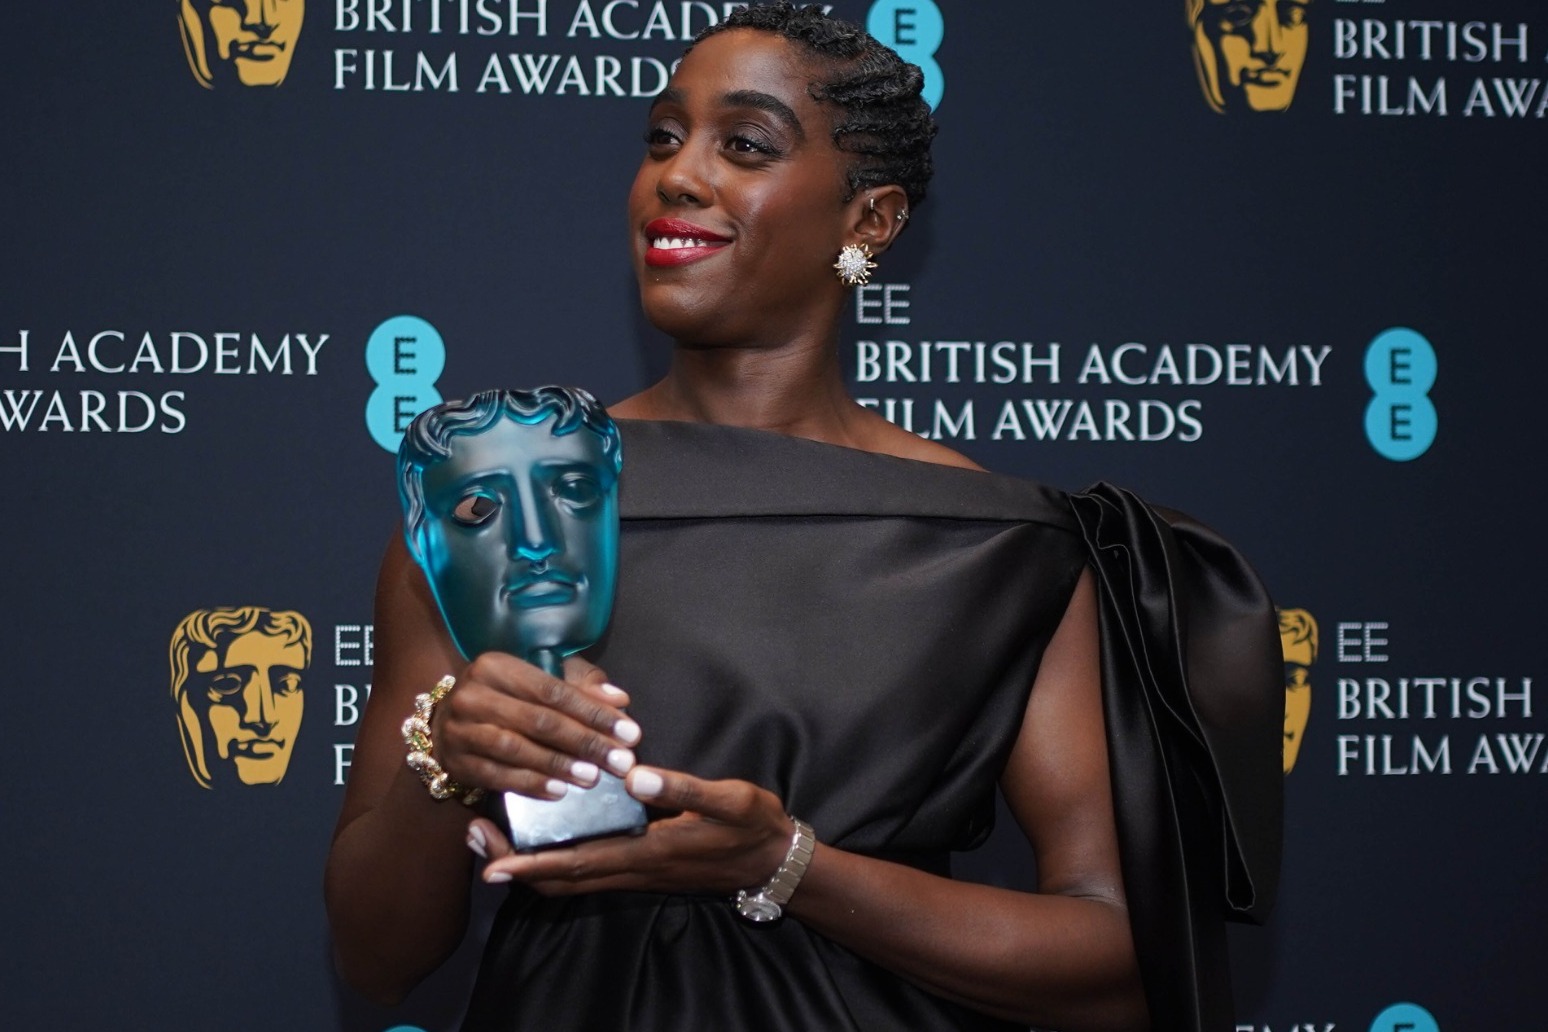 Bafta award winners show off their prizes and outfits at after-party 